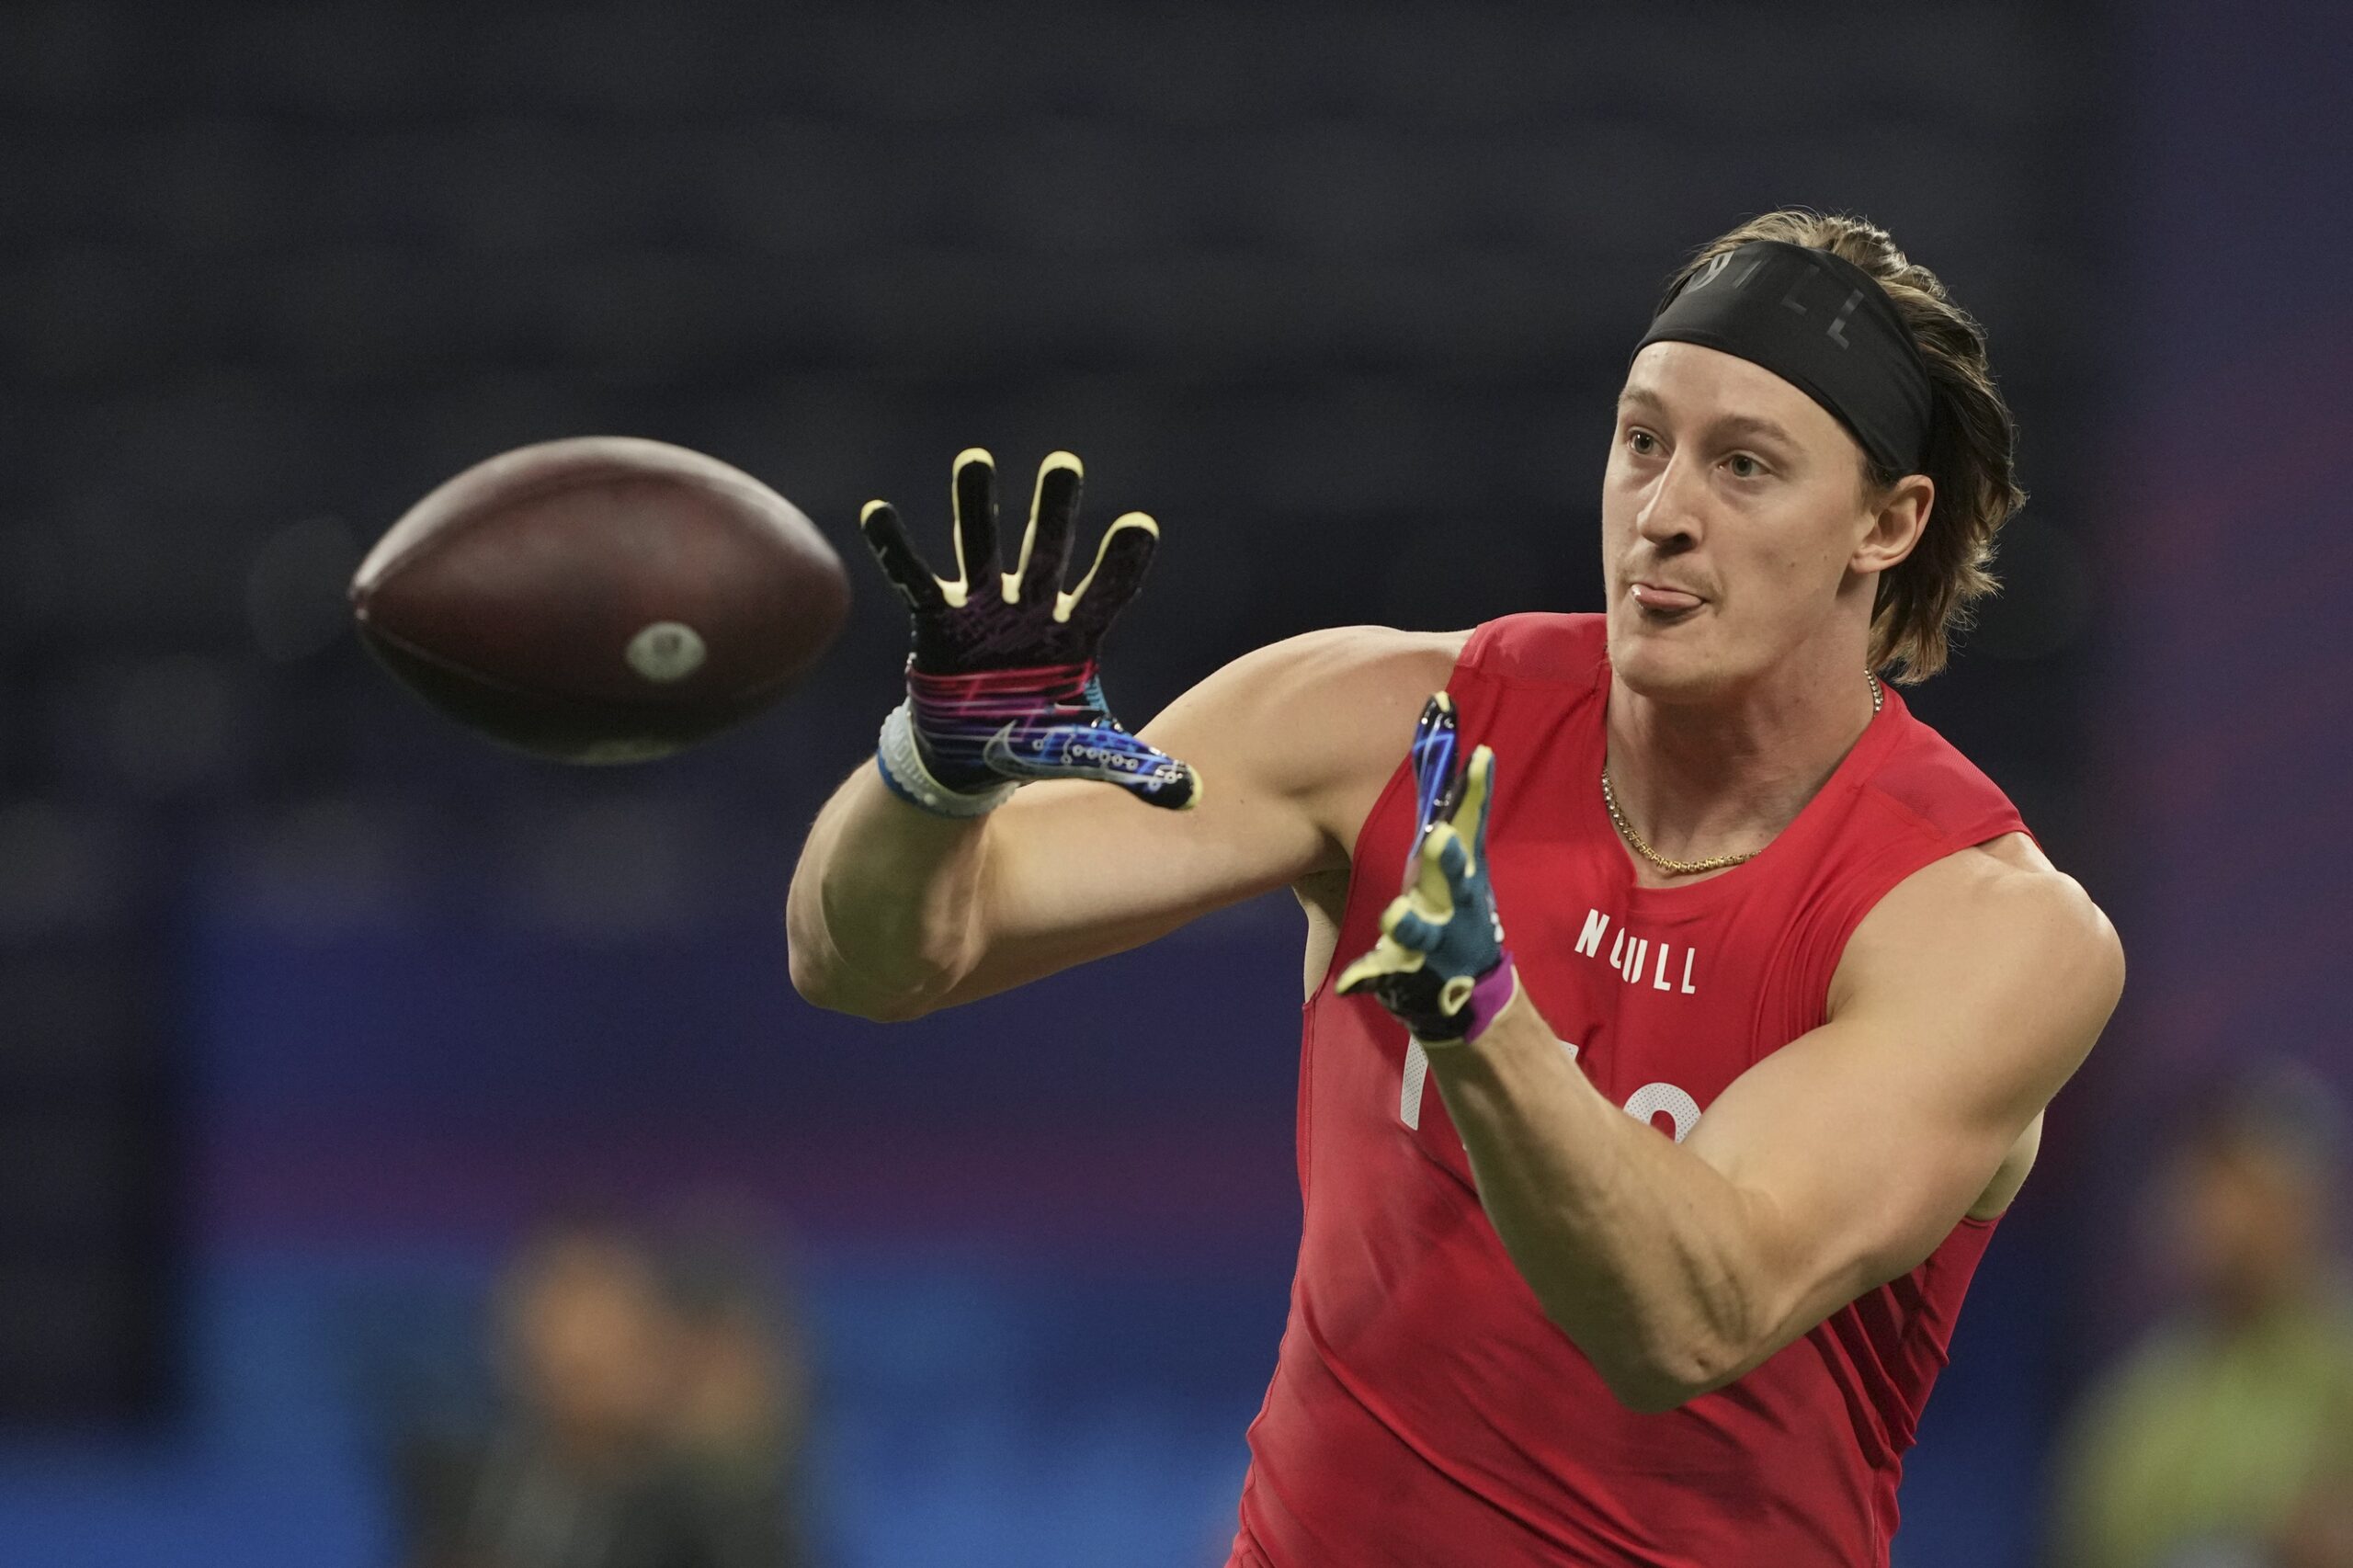 Sorting out who's No. 1 will continue after NFL combine